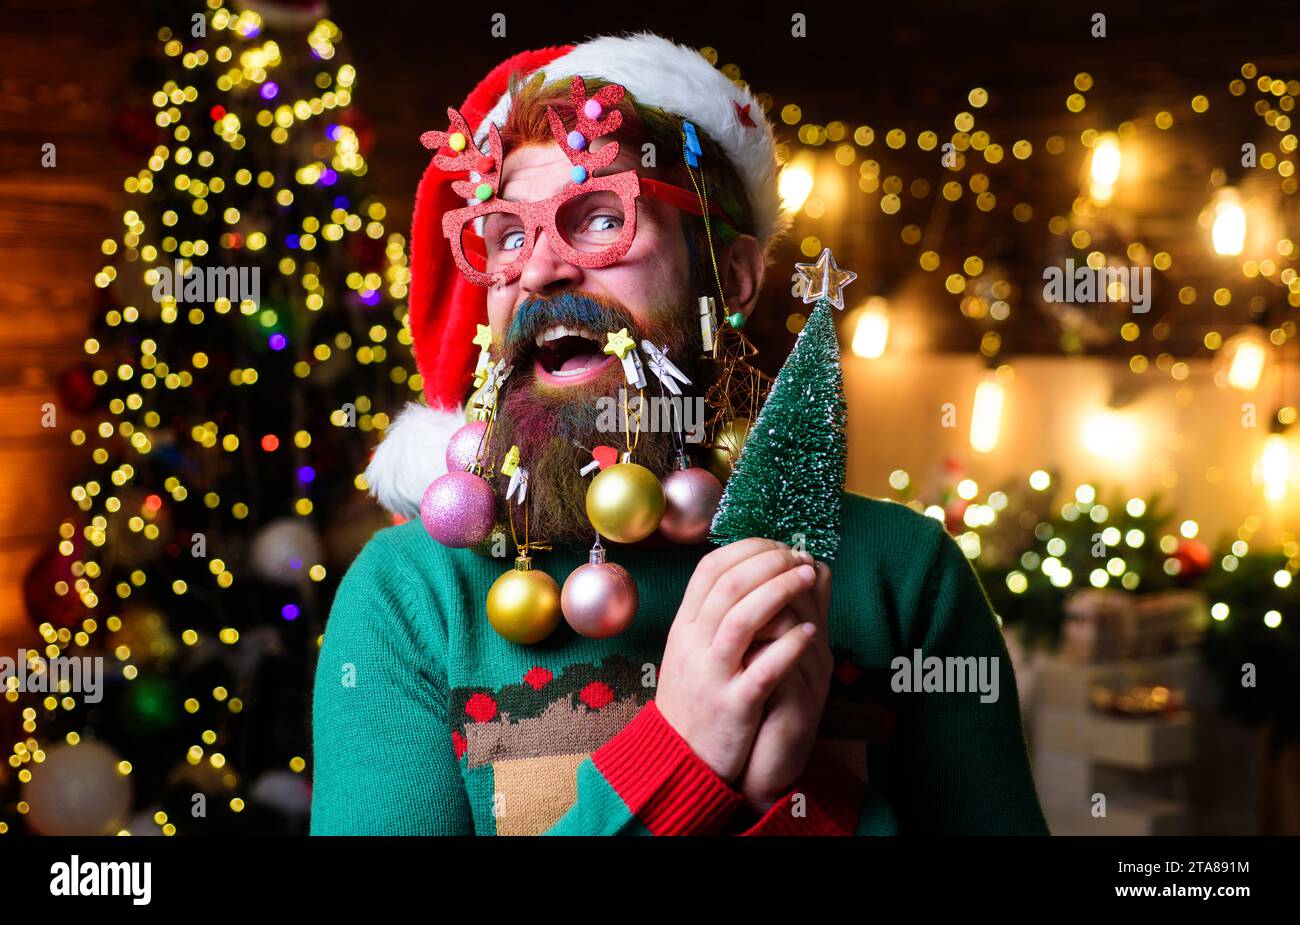 Happy Santa man with New Year balls in beard holds small Christmas tree. Christmas beard style. Bearded guy in party glasses and Santa hat with little Stock Photo